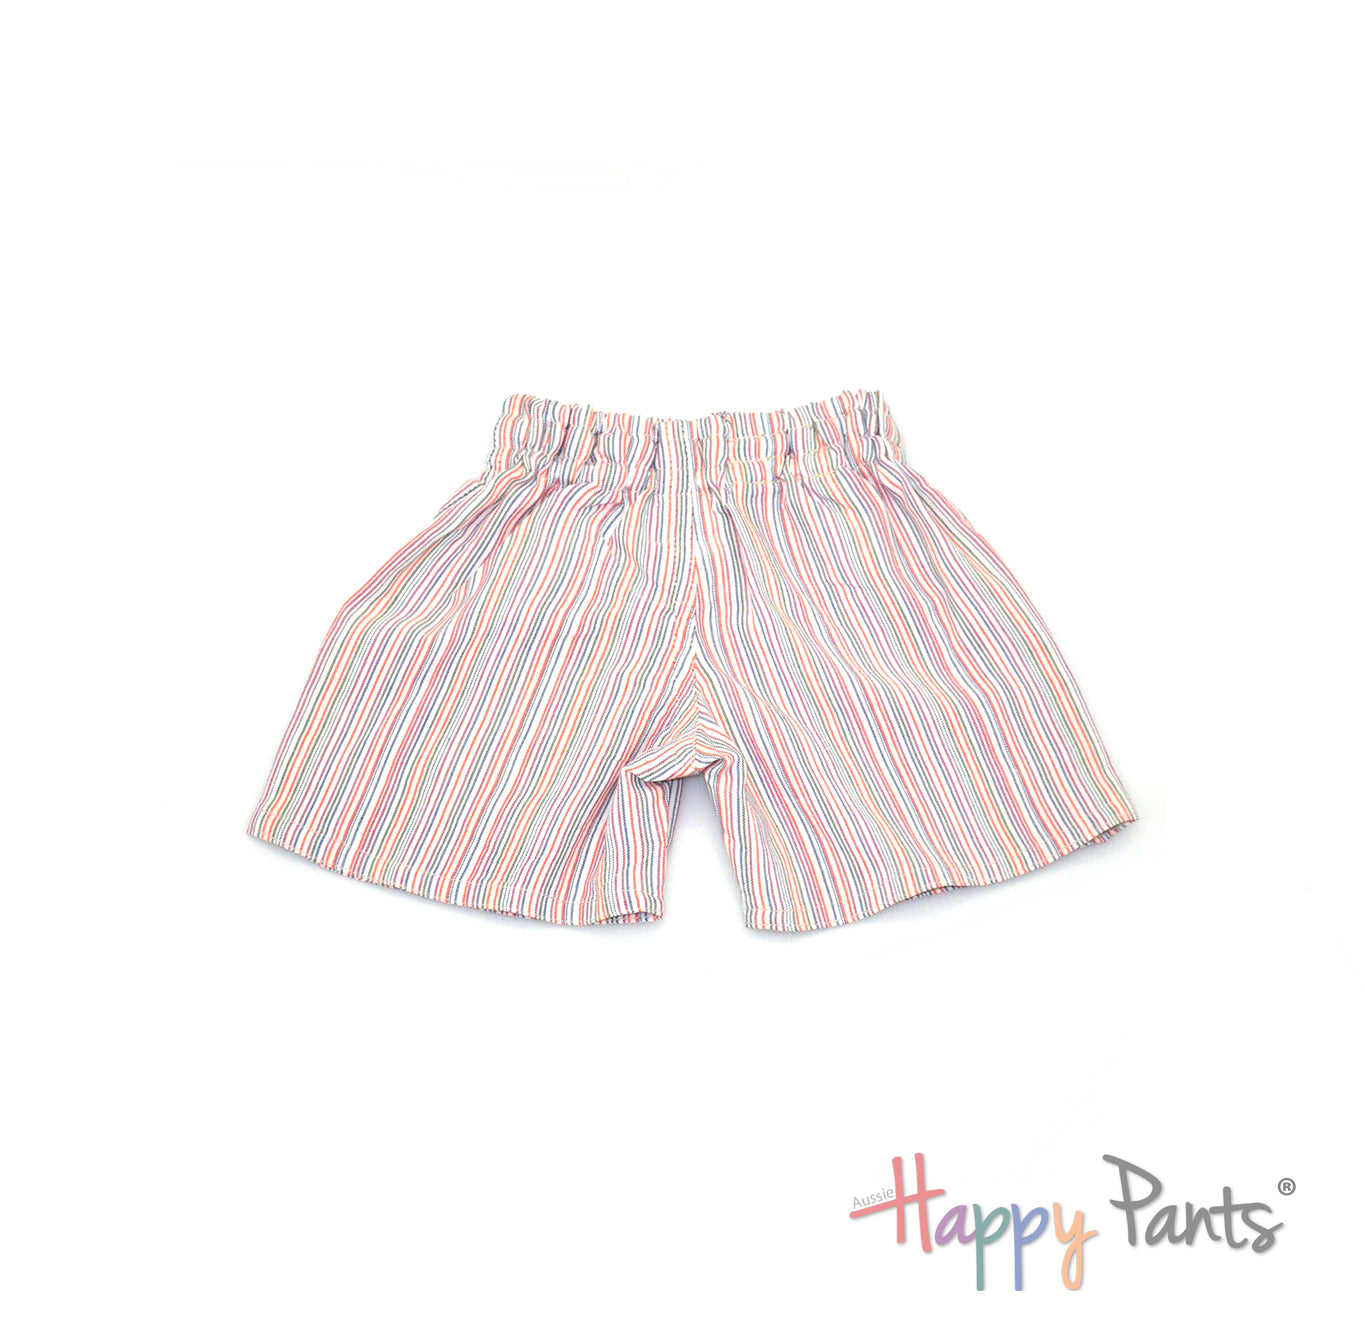 Cotton Candy Dreams Shorts for Boys